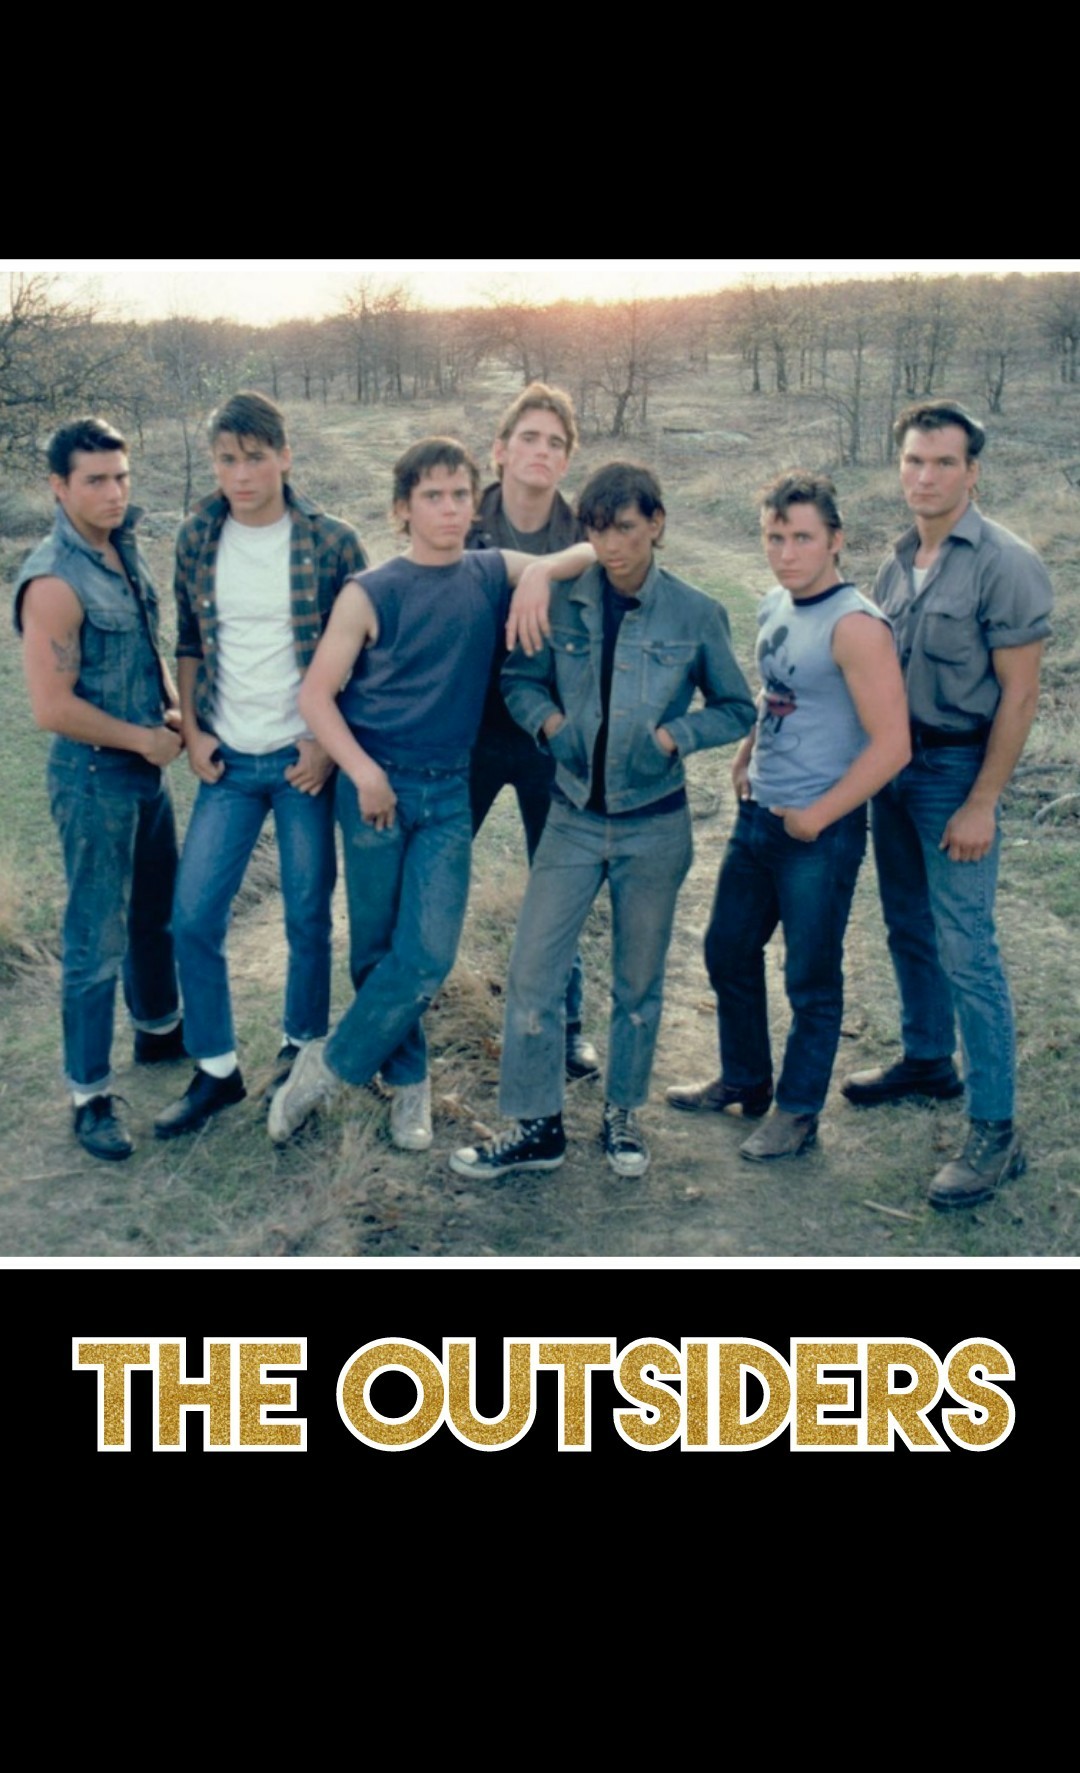 The outsiders  They are all super cute!